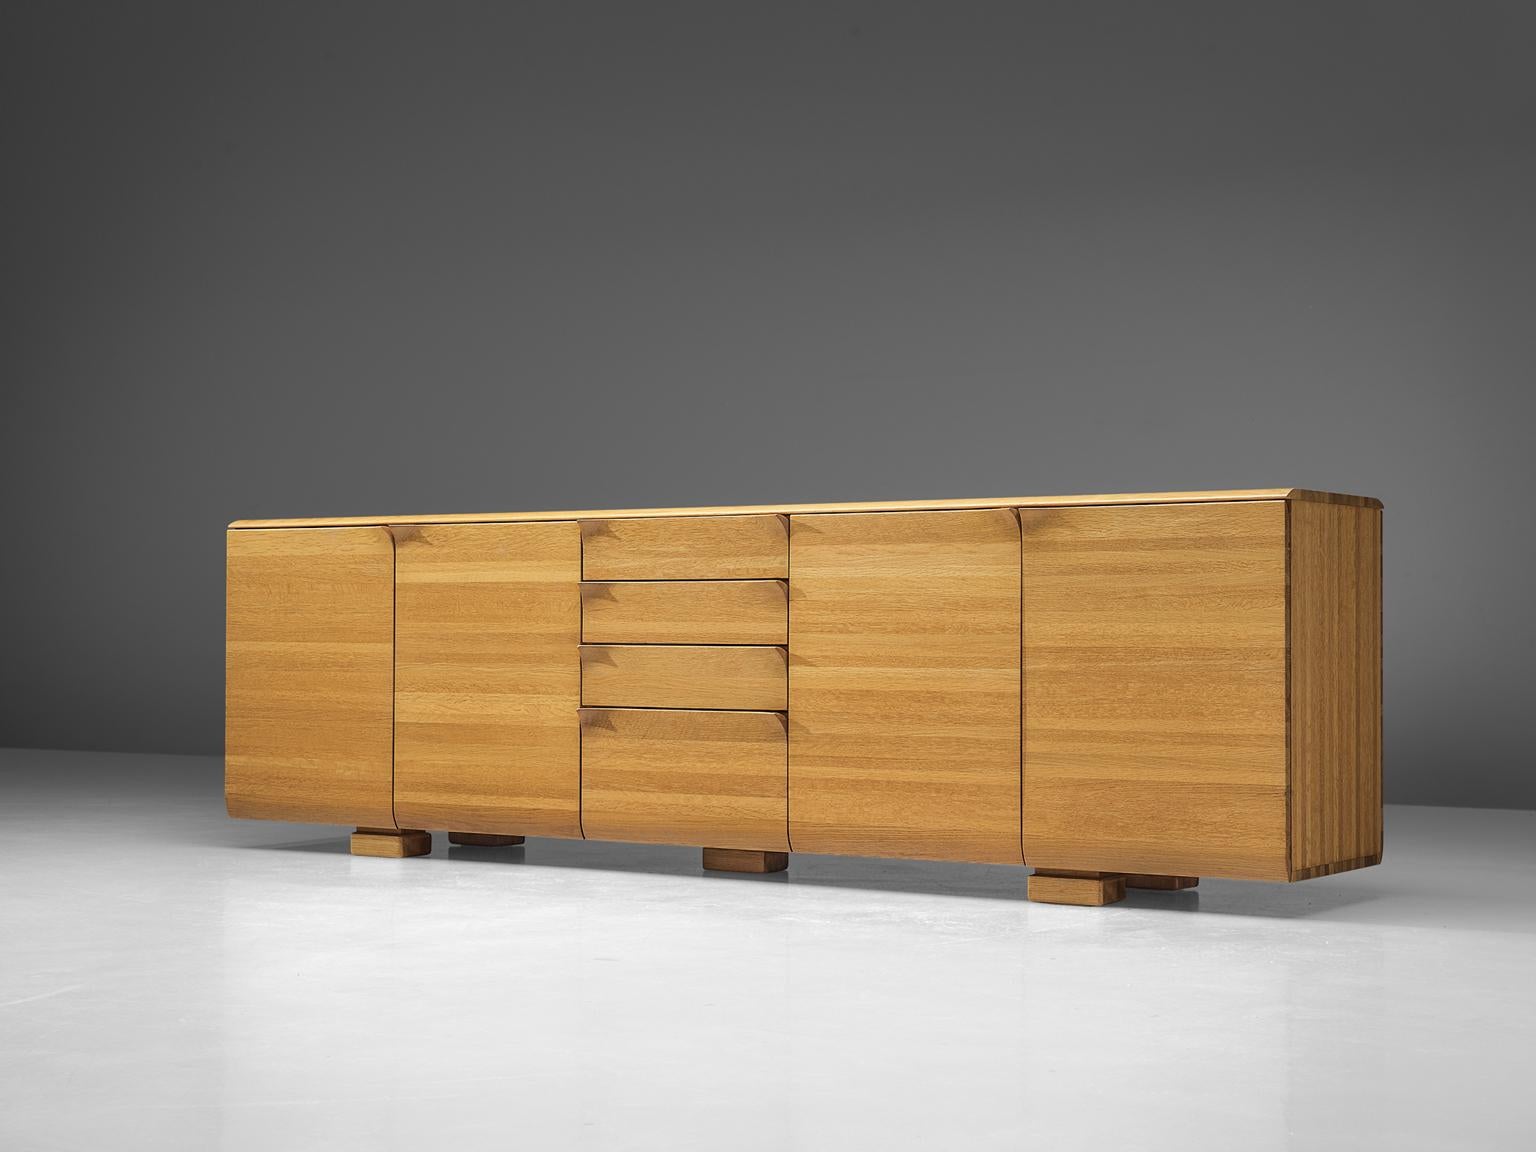 Van Den Berghe, Pauvers, sideboard, oak, Belgium, 1970s.

This Minimalist Belgian credenza features striking handles. The doors flow over in the handles, which bent like a page of paper. The credenza offers plenty of storage space, containing two